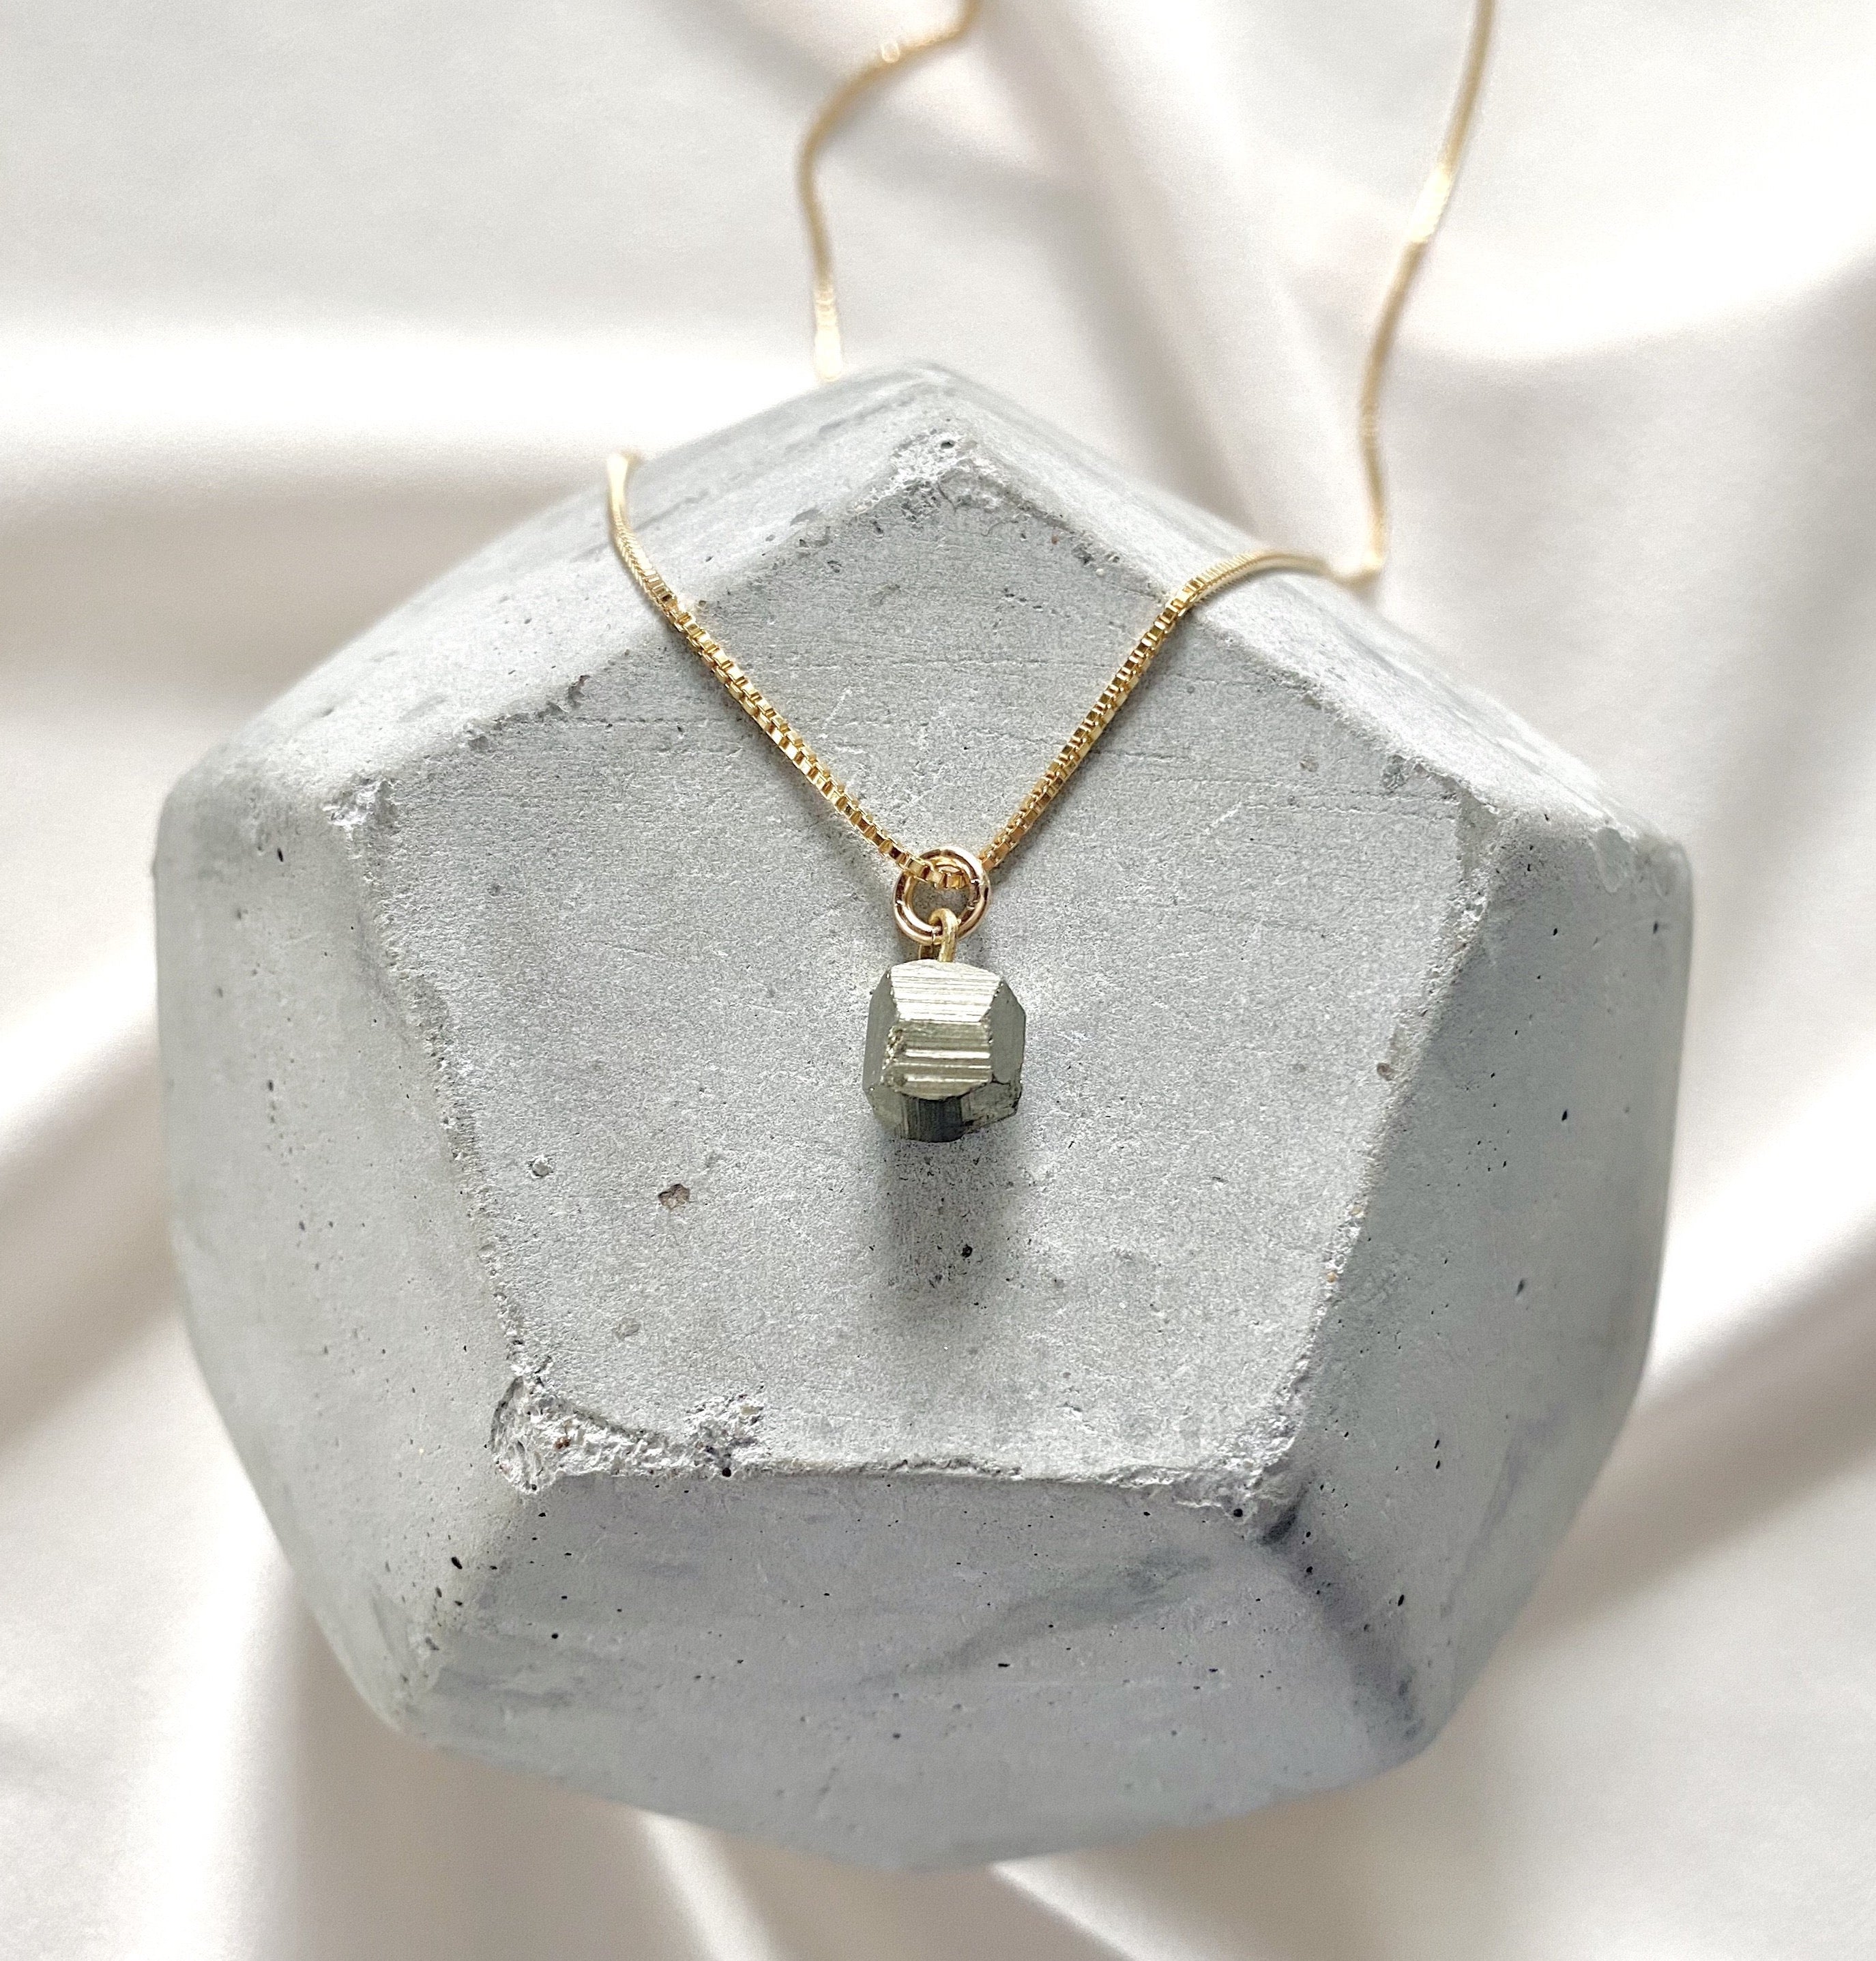 Raw Pyrite Charm Necklace - Gold Filled Chain